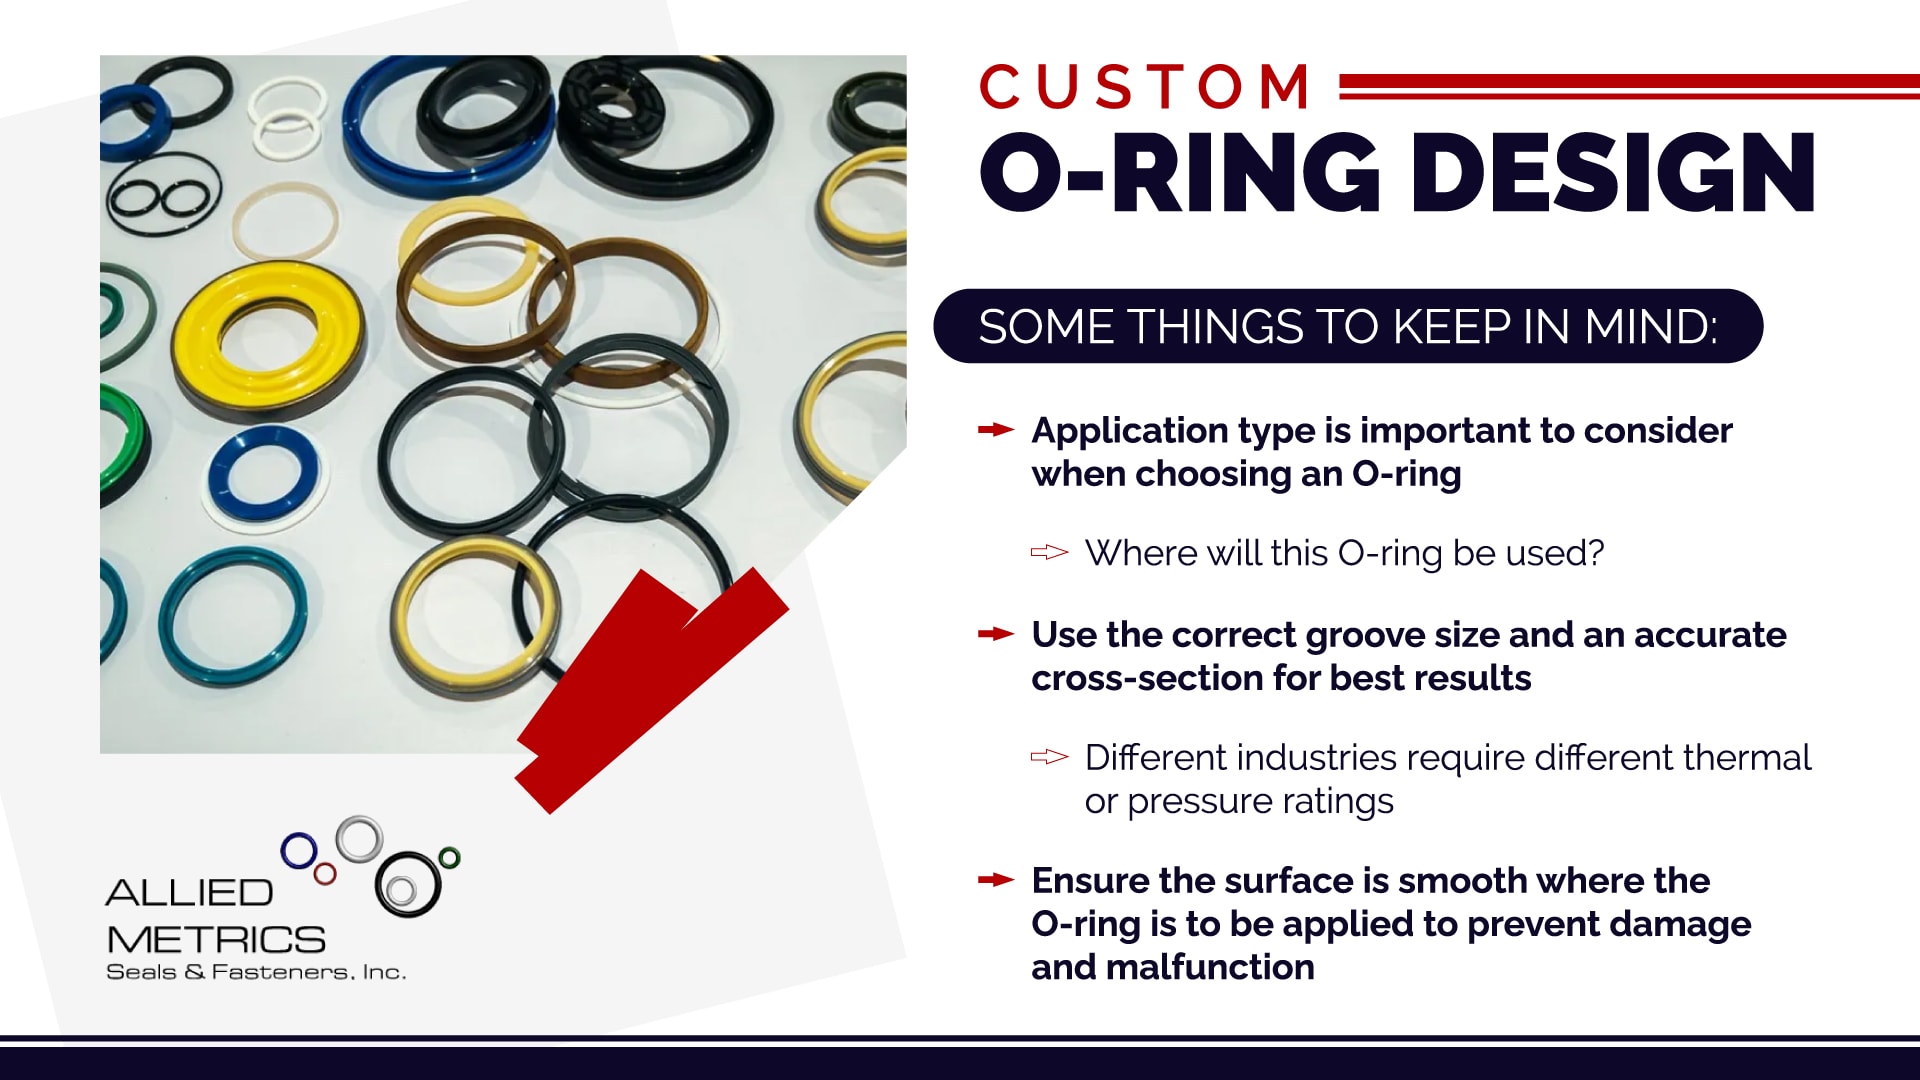 All About O-Rings: From Basics to Advanced Applications